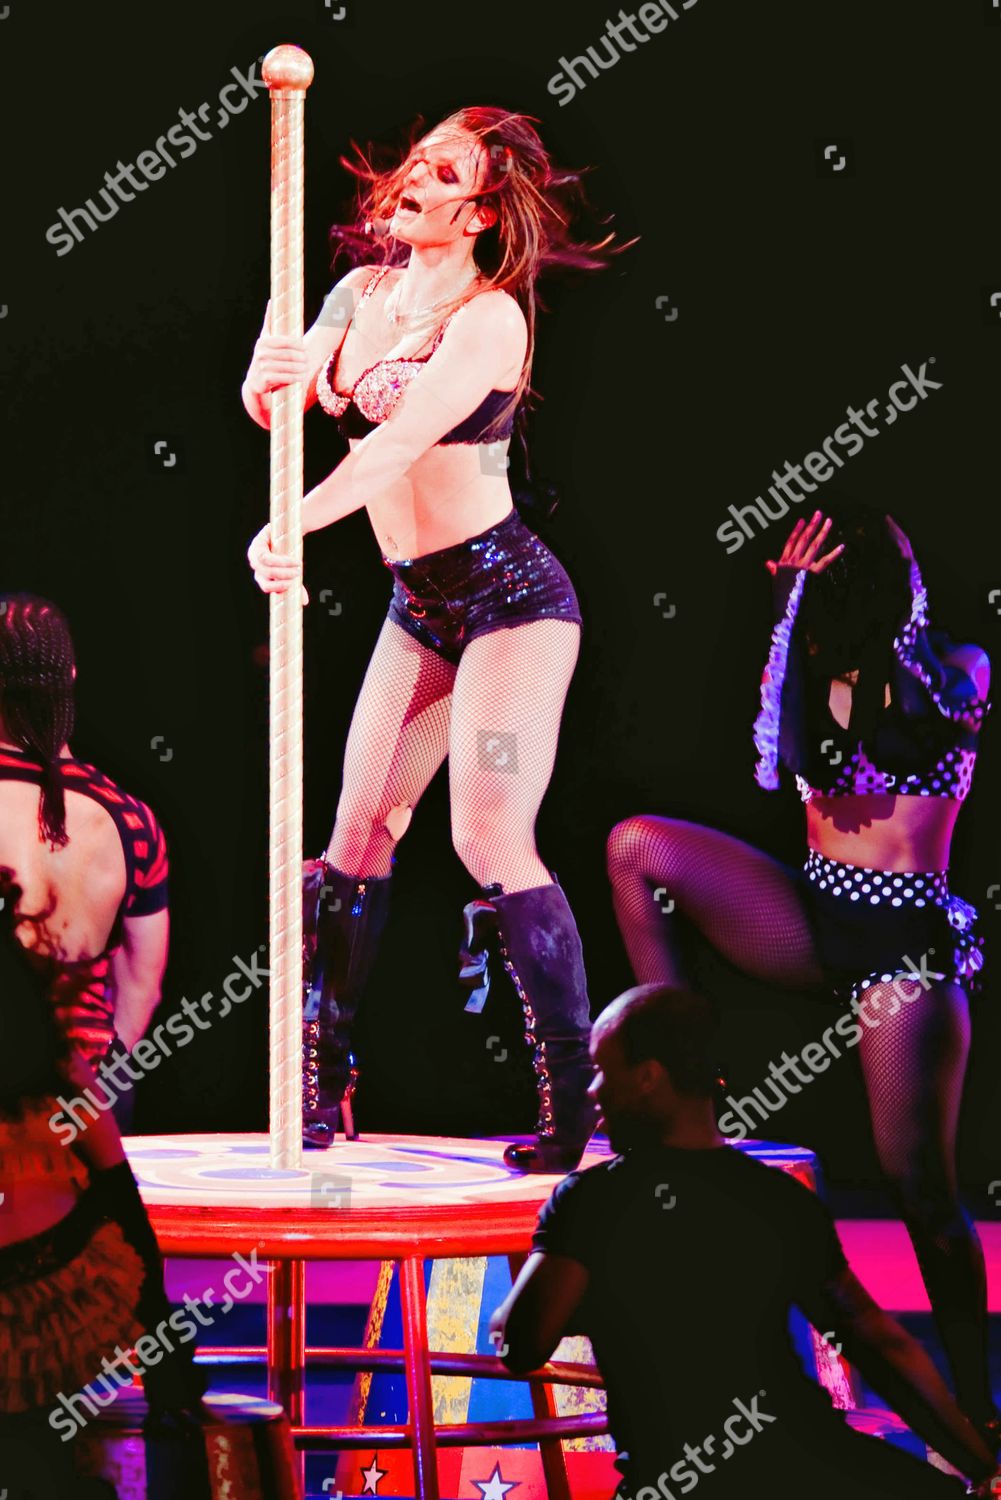 britney-spears-in-concert-on-her-circus-